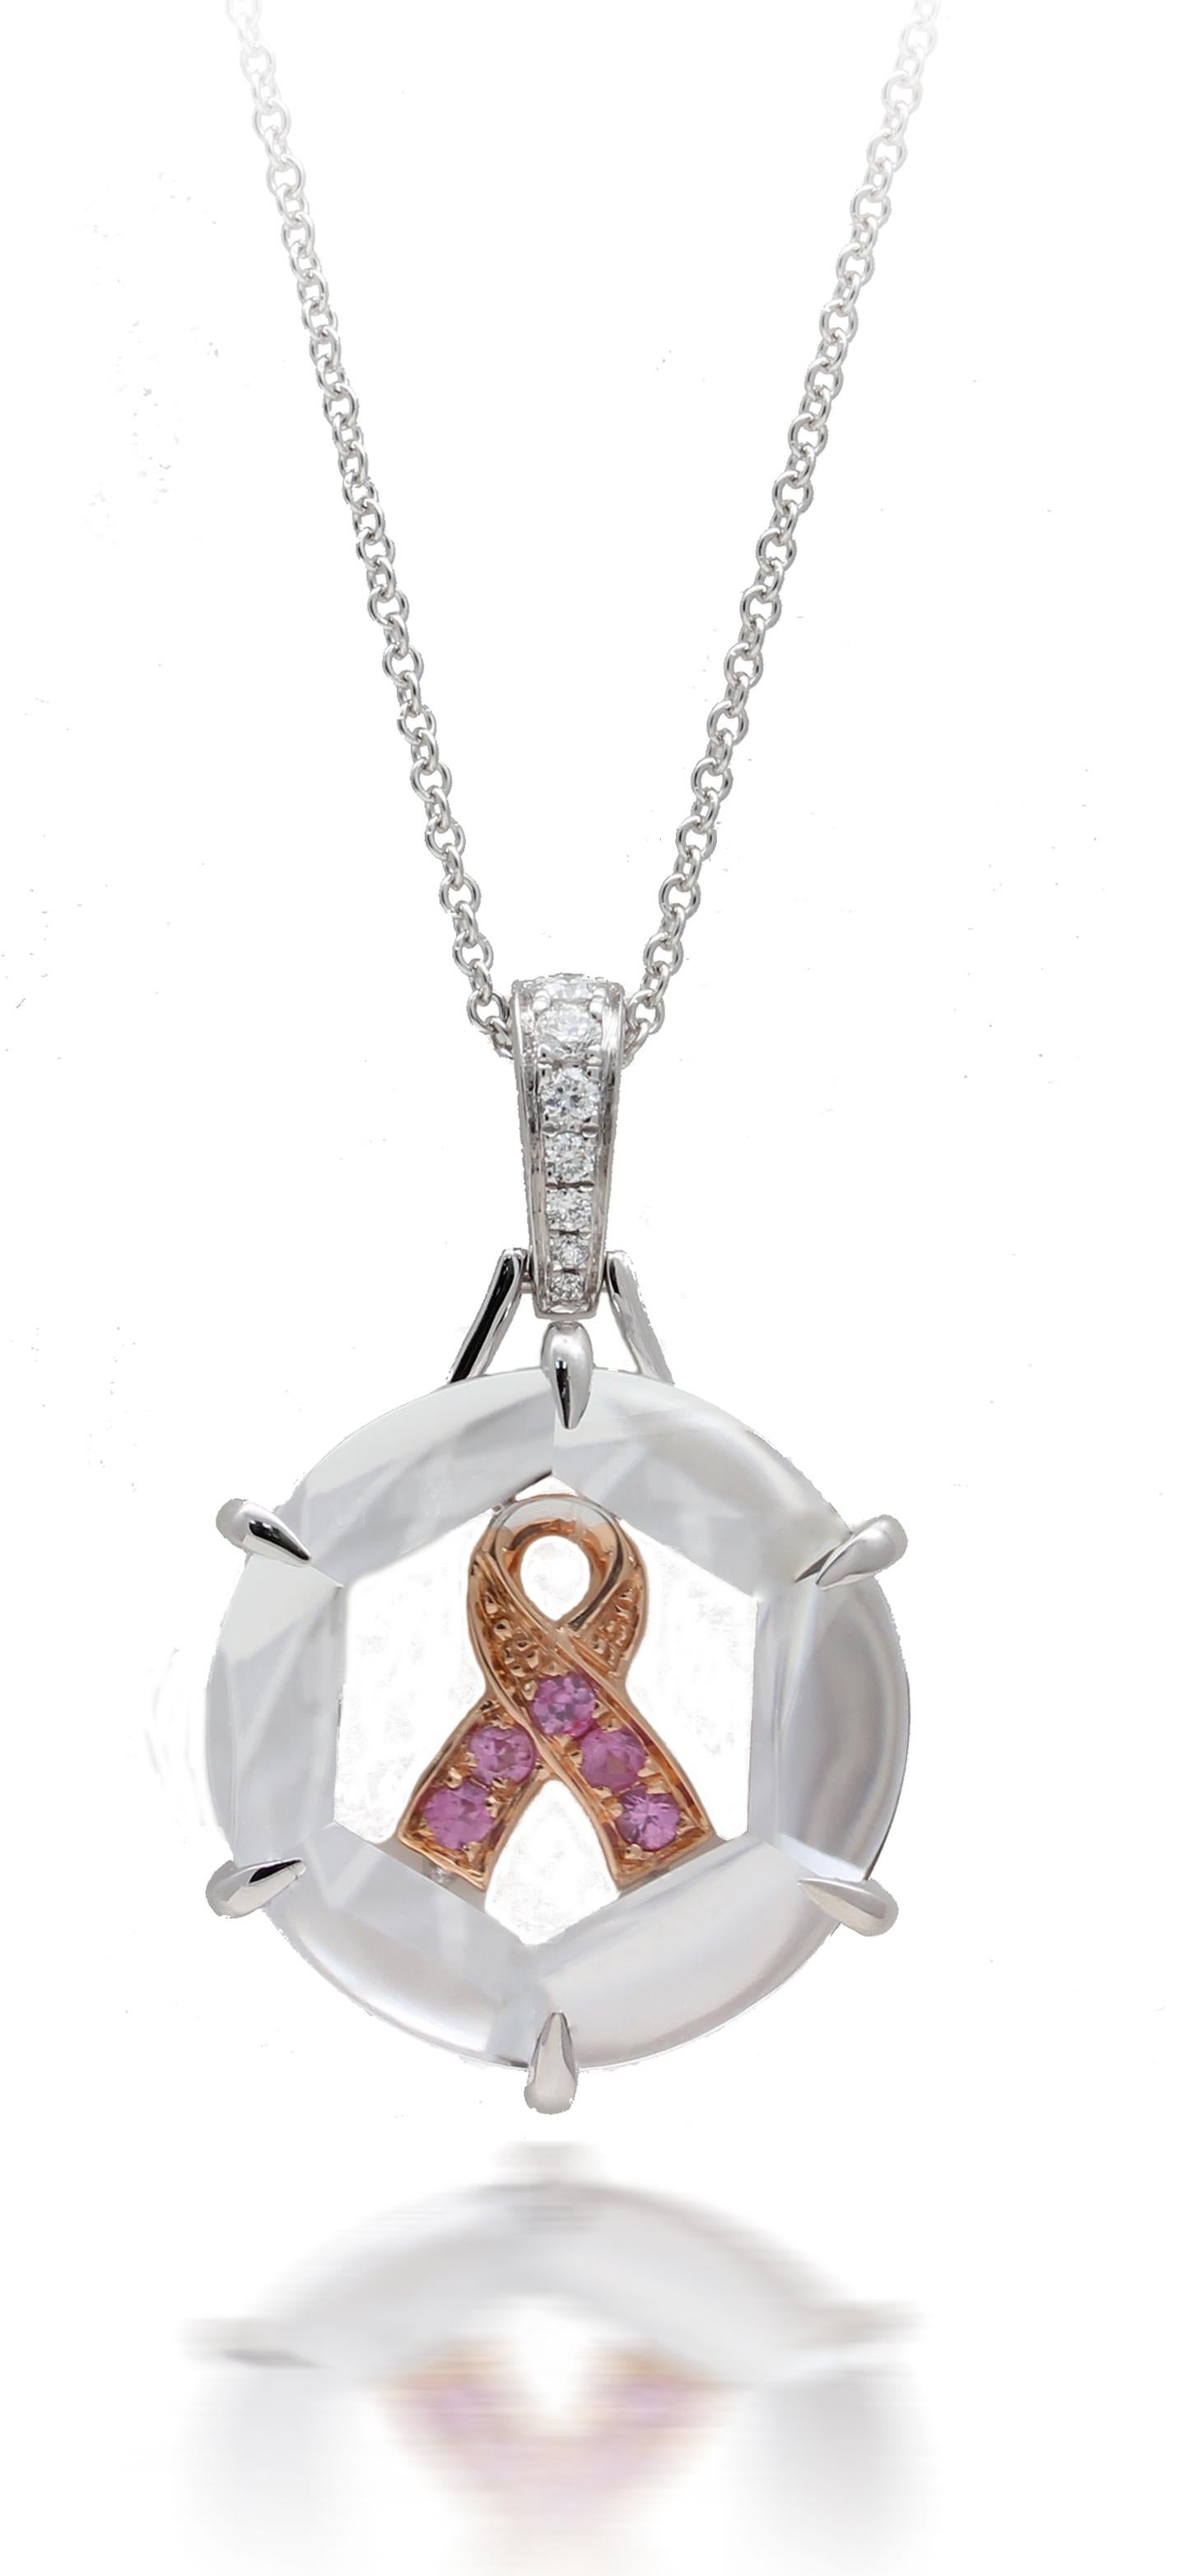 18K PWG PINK SAPPHIRE BREAST CANCER RIBBON INSIDE JELLY WITH DIA BALE PENDANT WITH CHAIN
5 PSA 0.08 CT, 7 DIA 0.08 Carat 